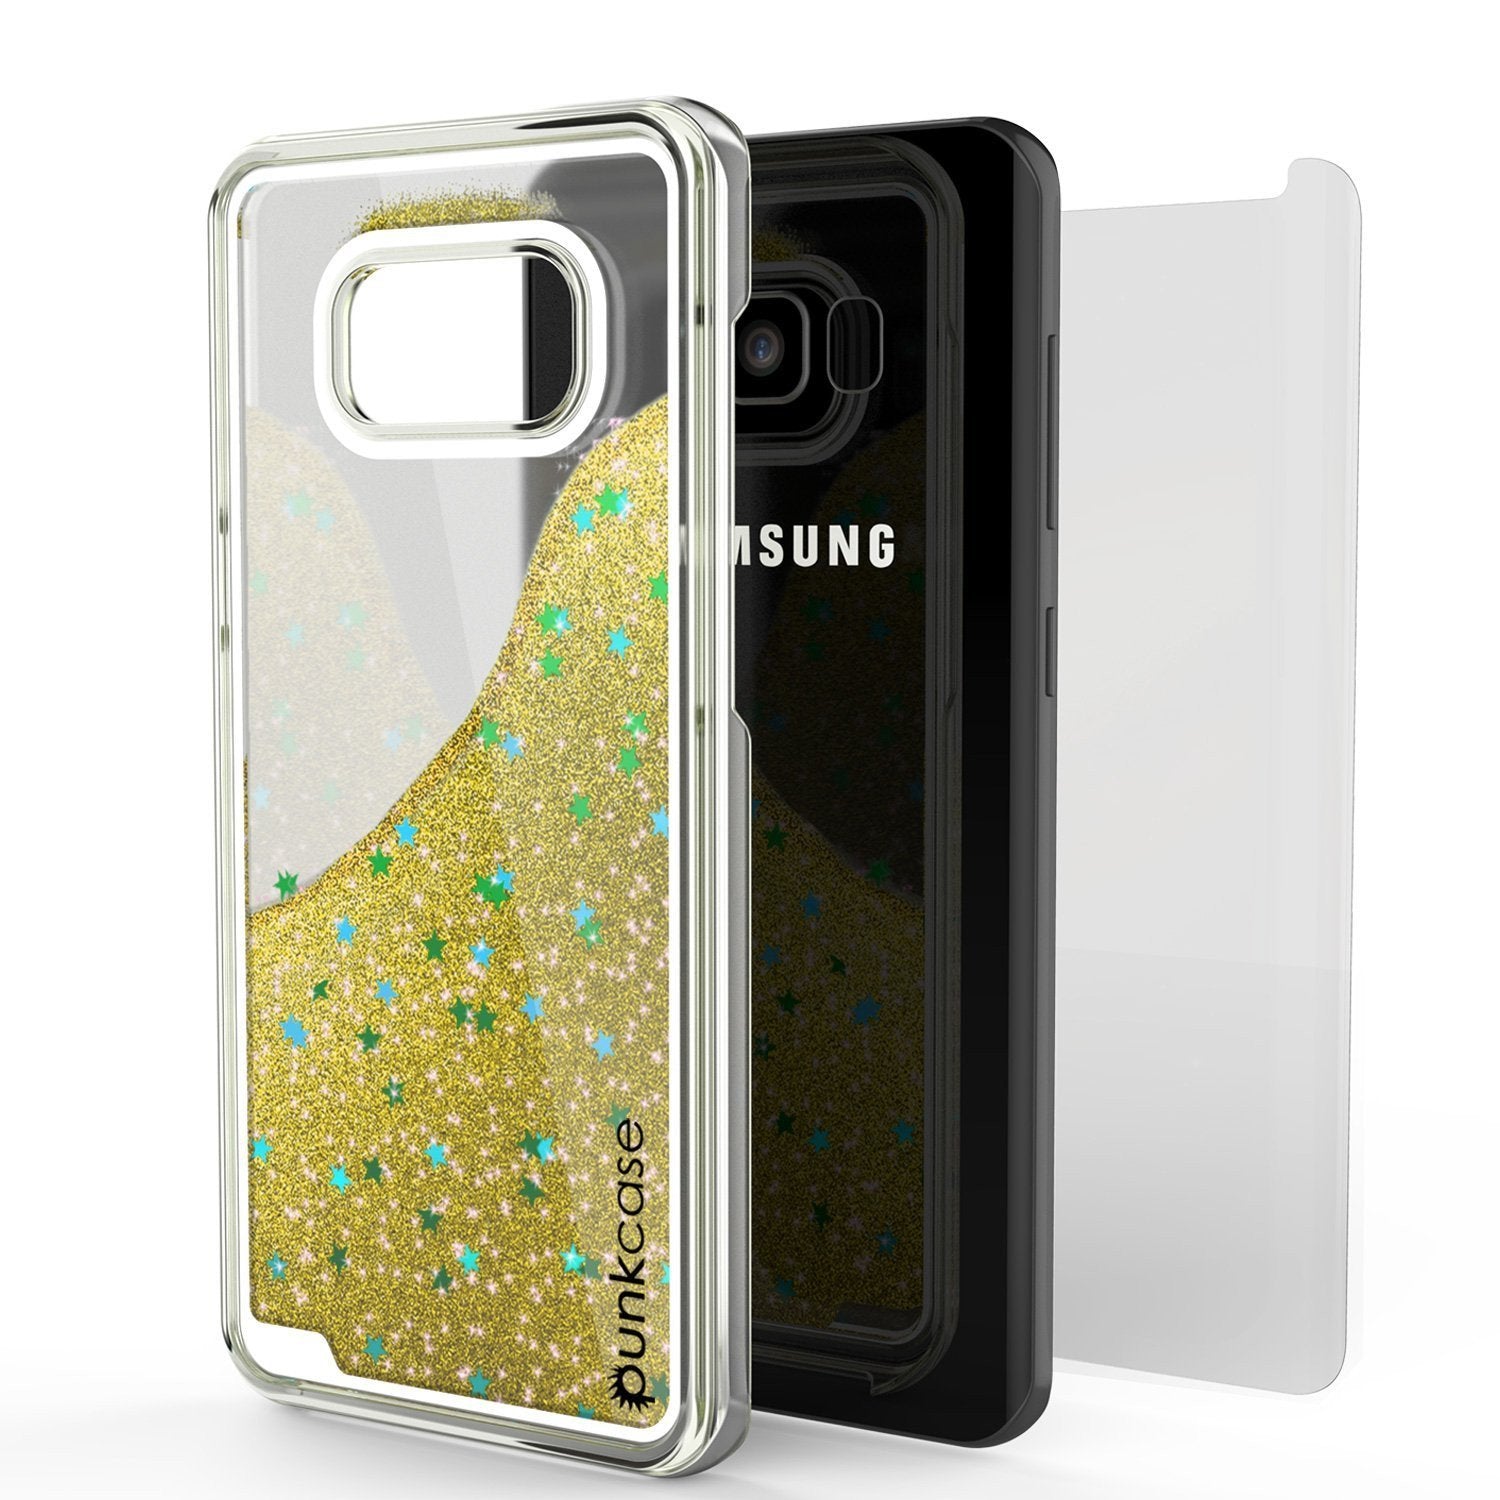 Galaxy S8 Case, Punkcase Liquid Gold Series Protective Dual Layer Floating Glitter Cover - PunkCase NZ